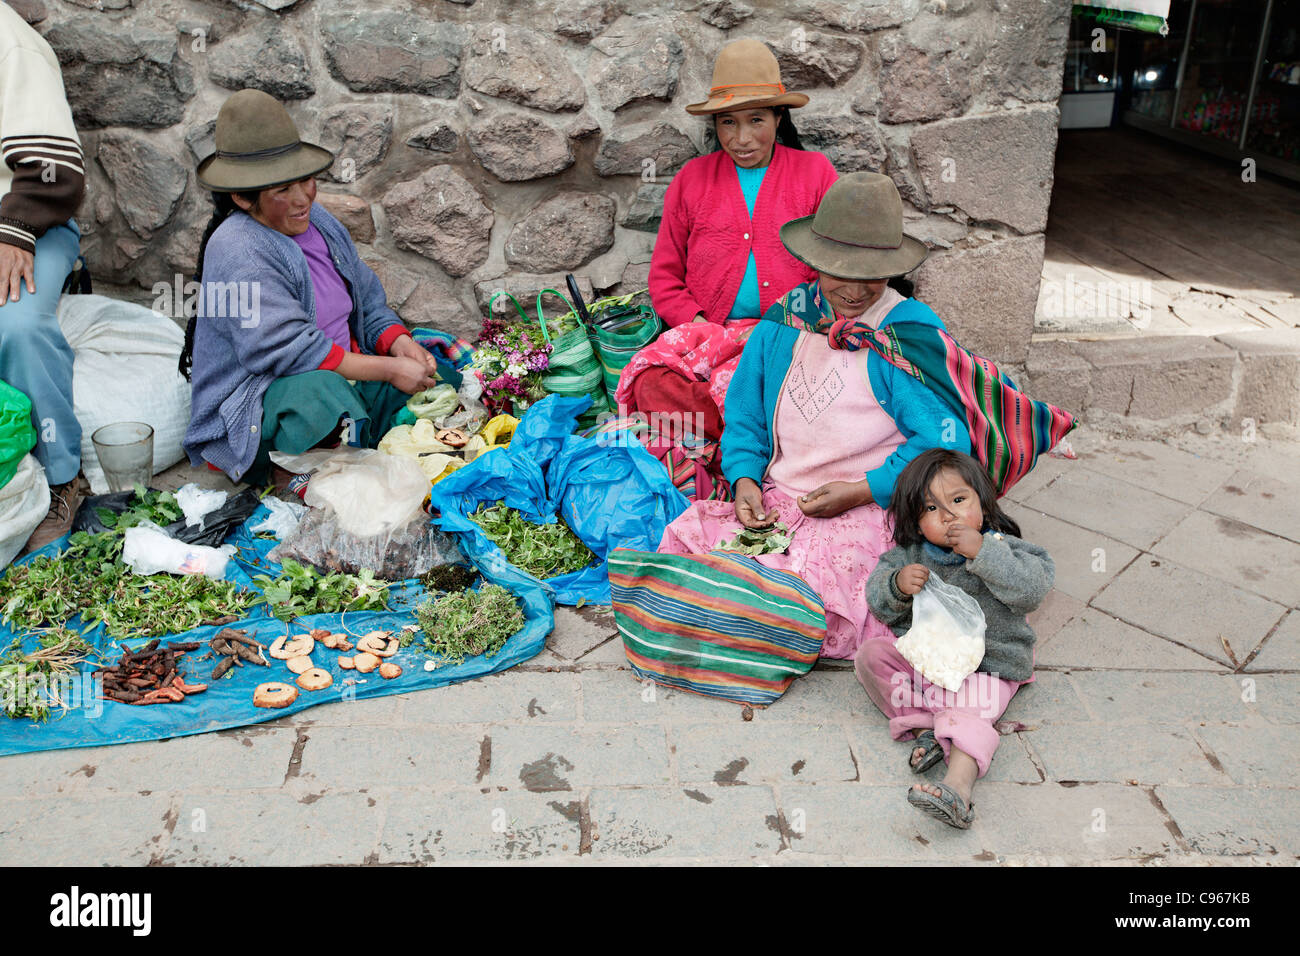 Indigenous women selling vegetables at Pisaq (Pisac) market, Andes mountains, Peru. Stock Photo